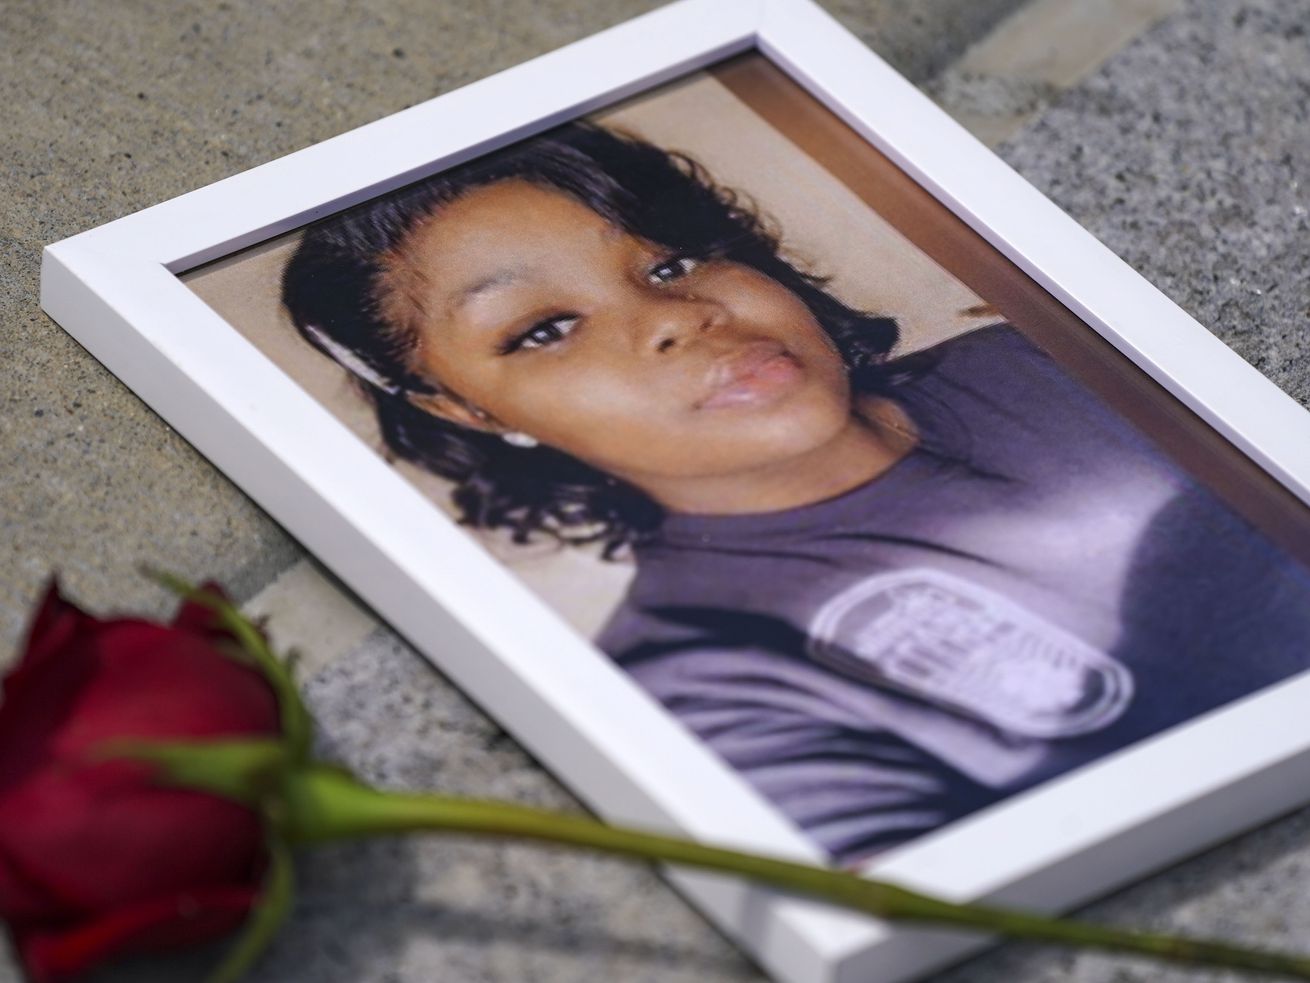 Why the Justice Department made a move in the police killing of Breonna Taylor